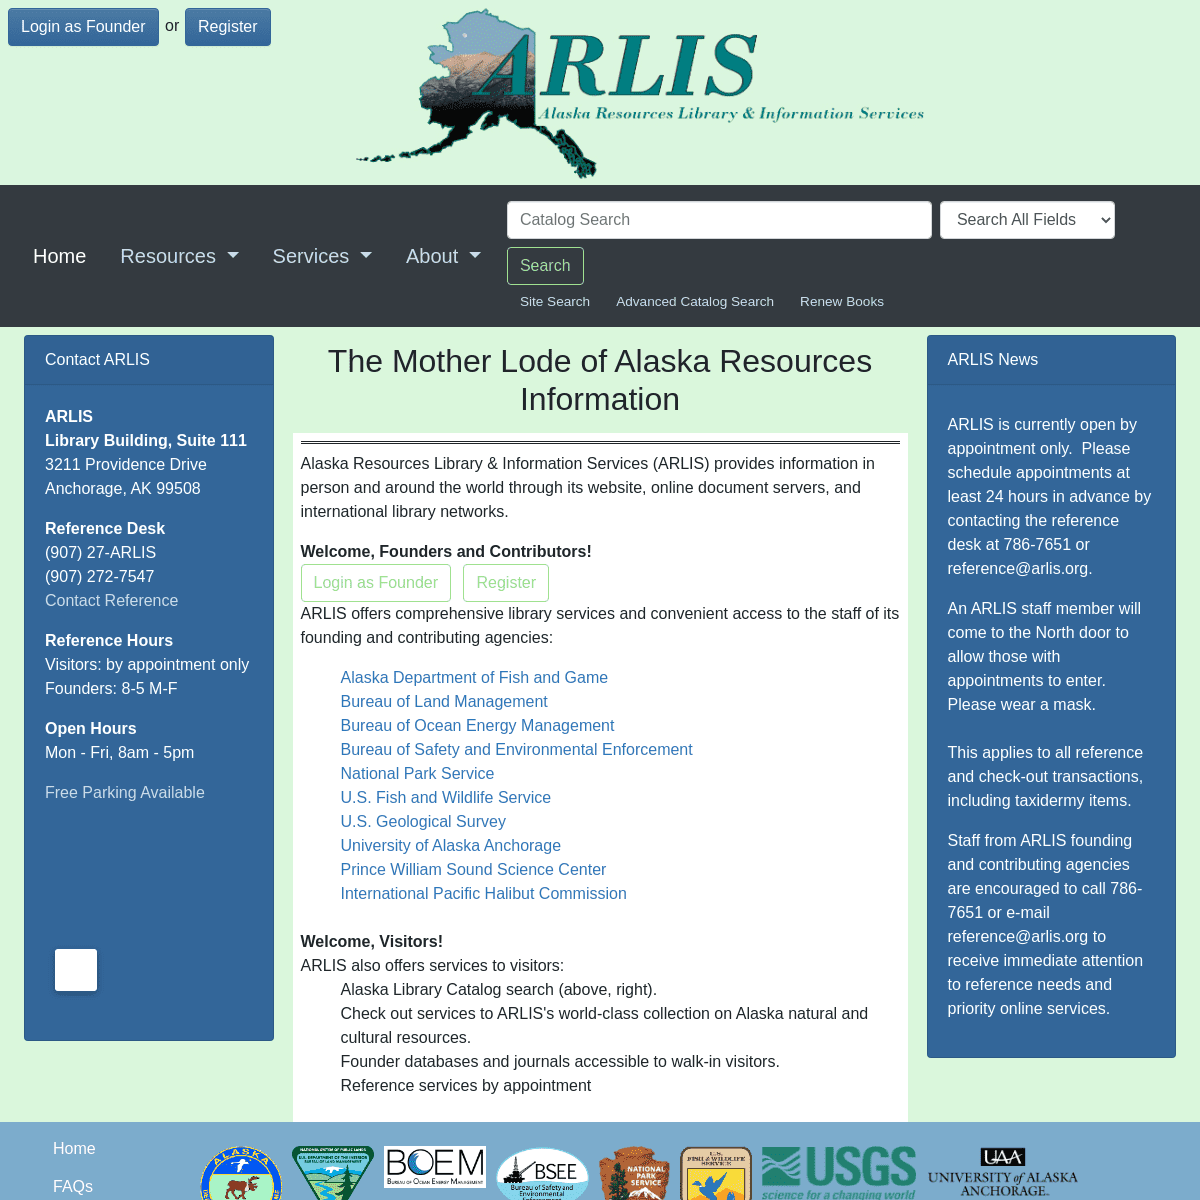 A complete backup of https://arlis.org